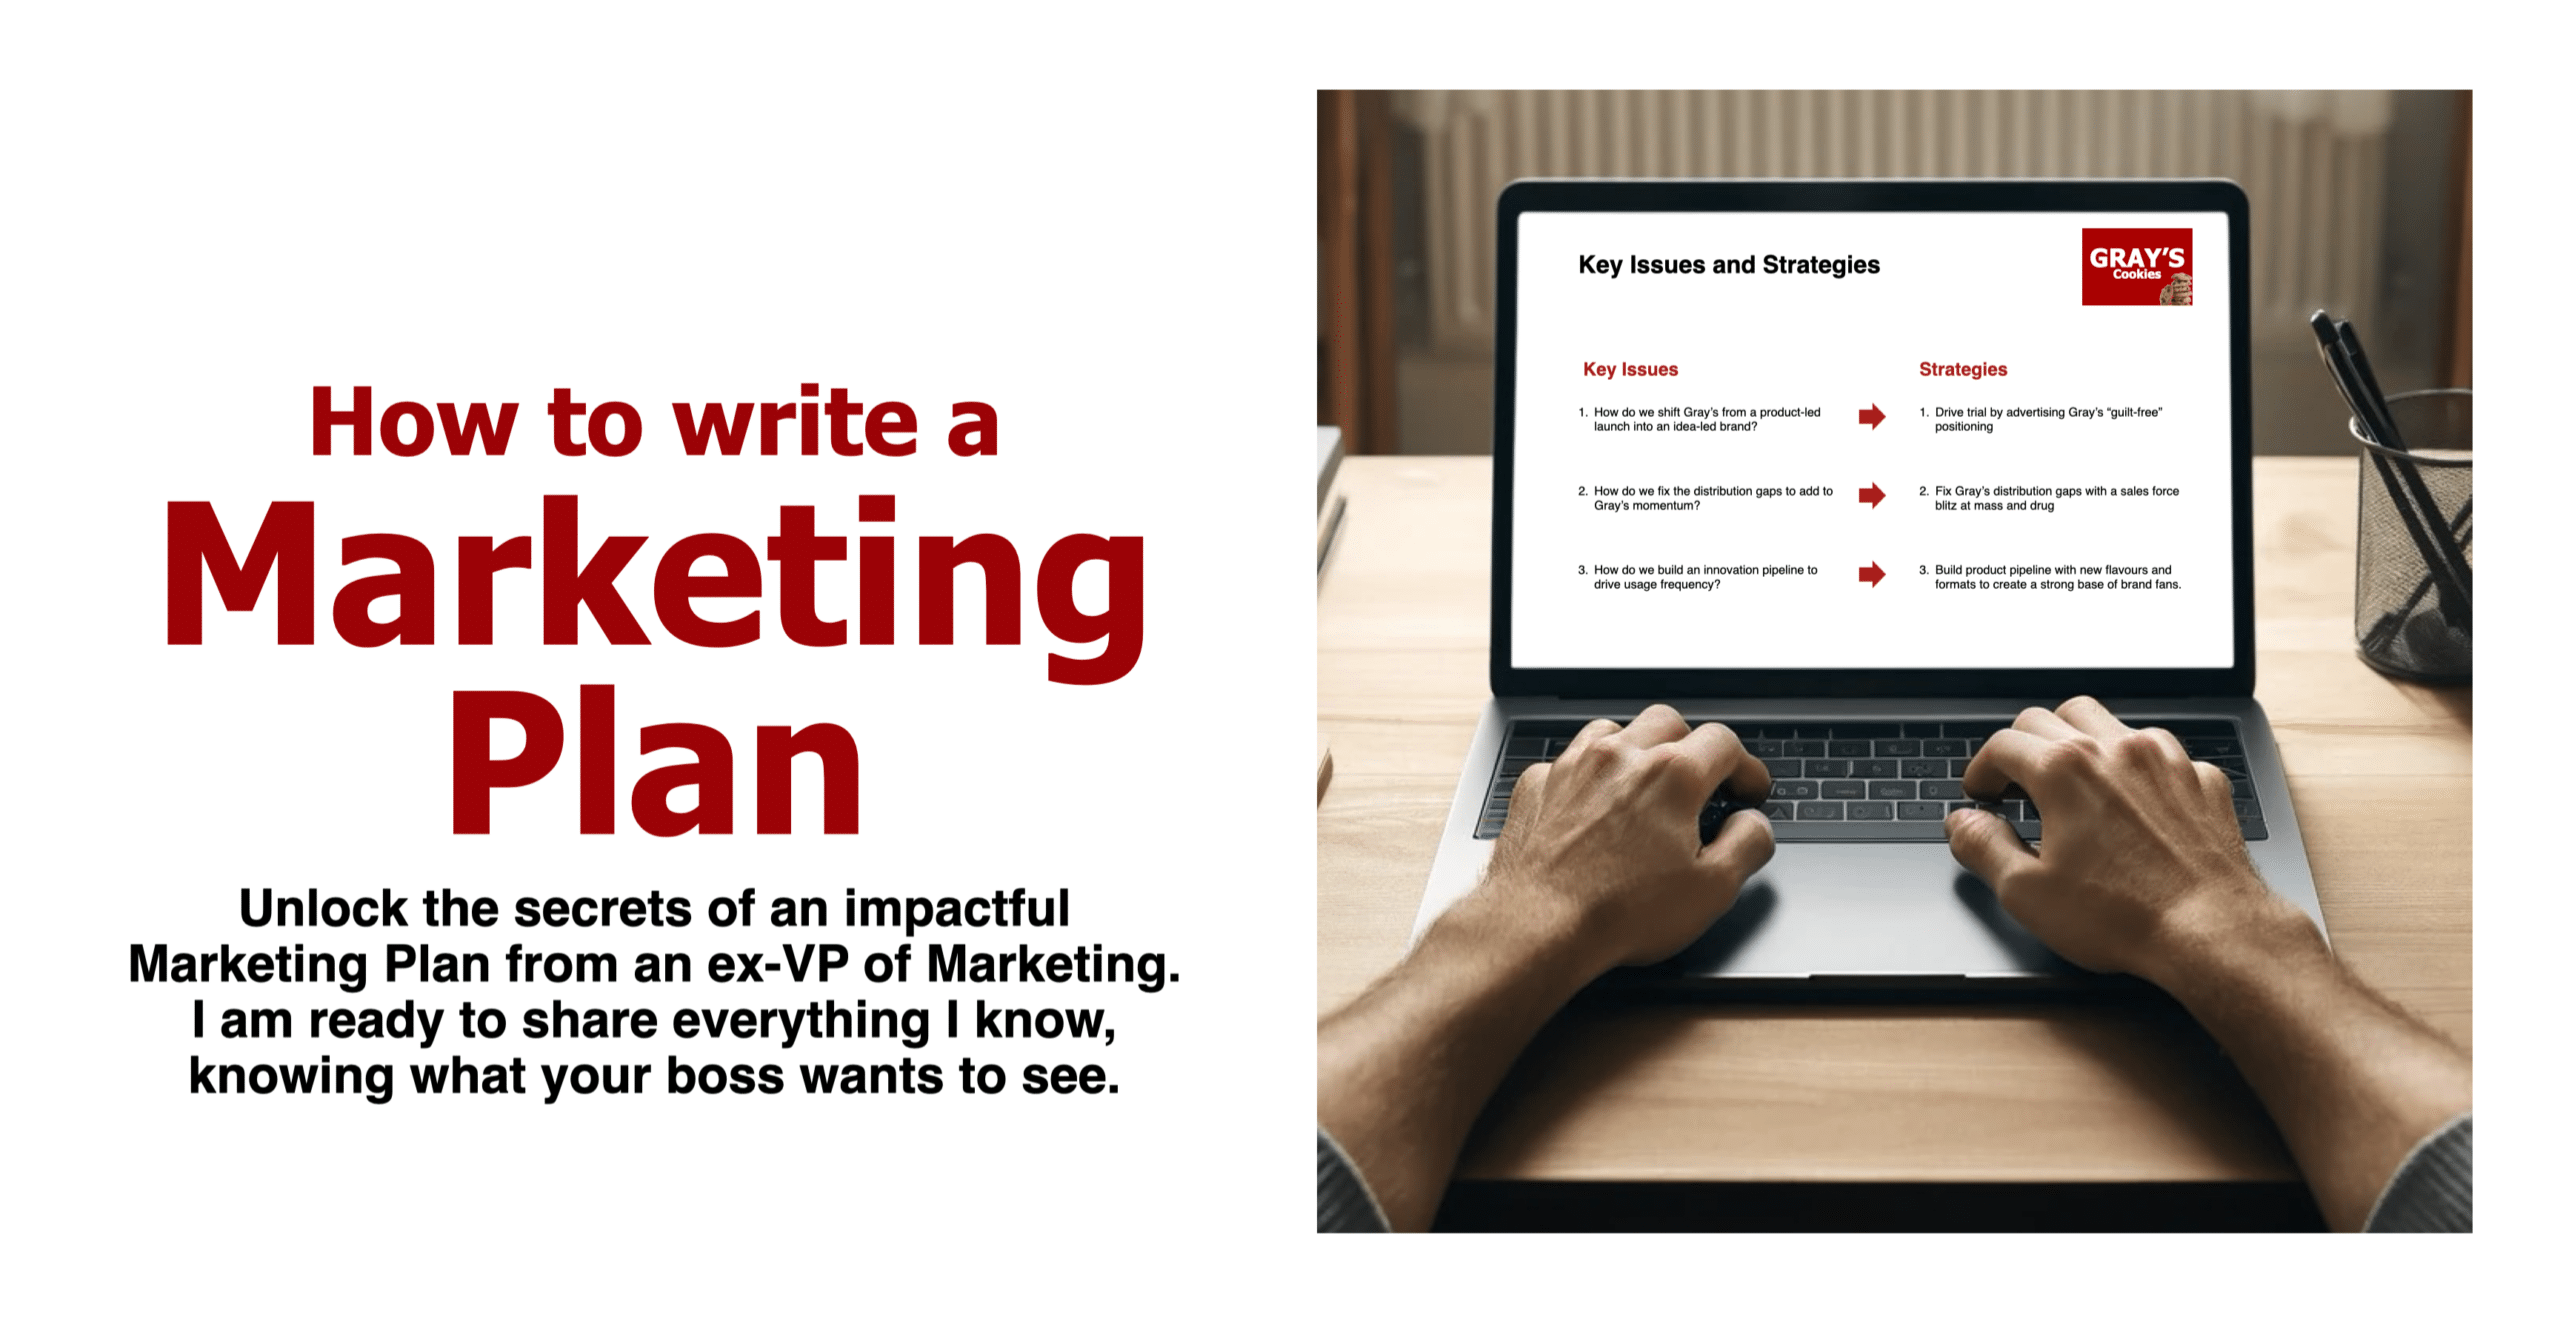 How to write a marketing plan that will impress your boss